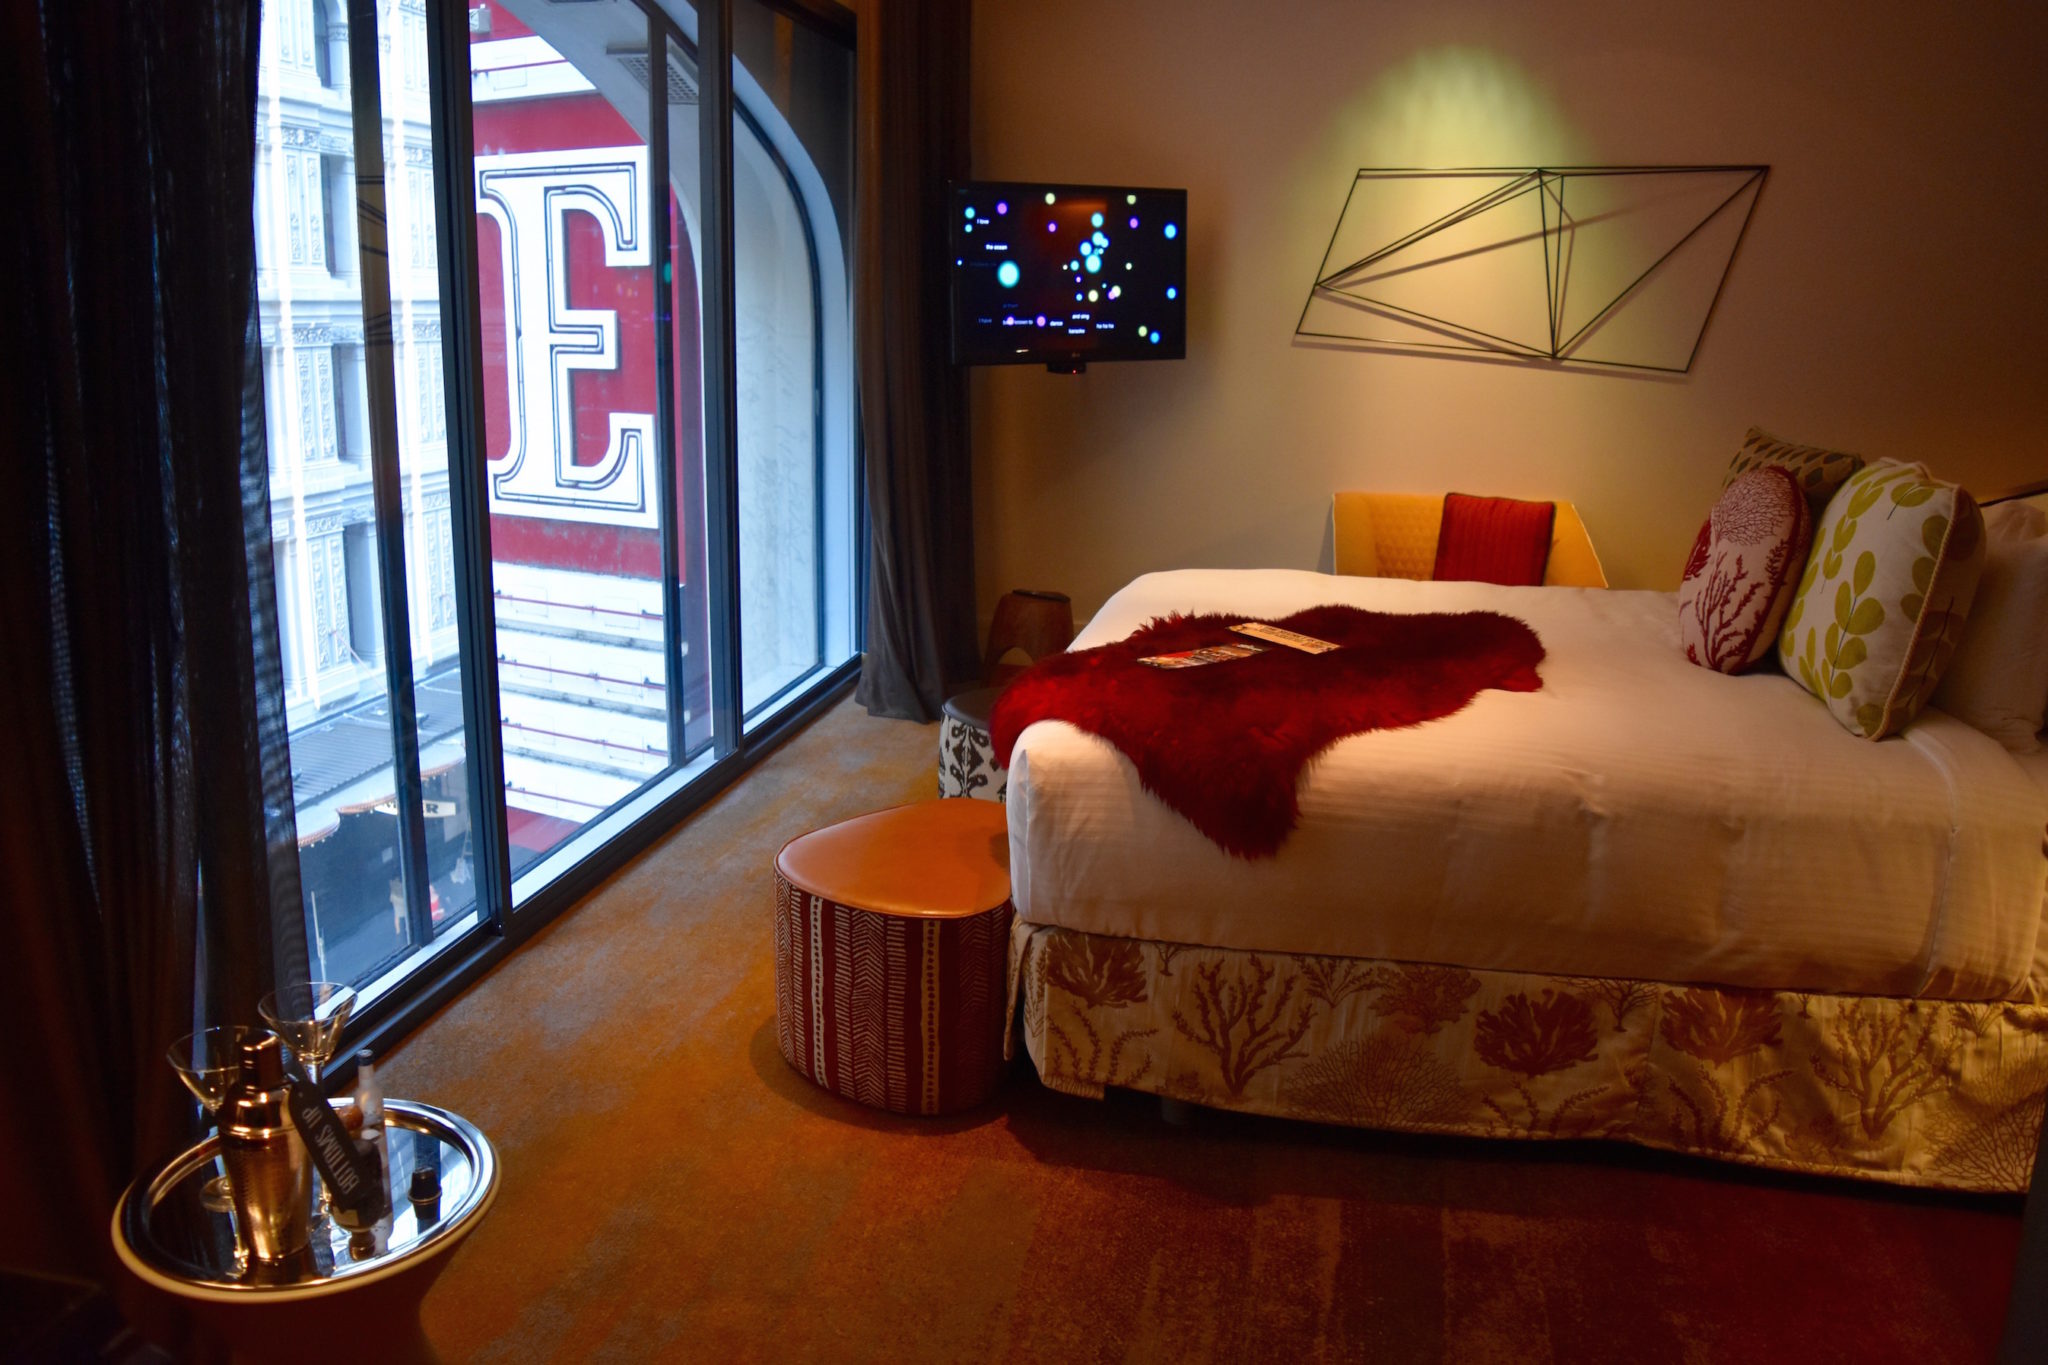 A double bed overlooking the State Theatre sign